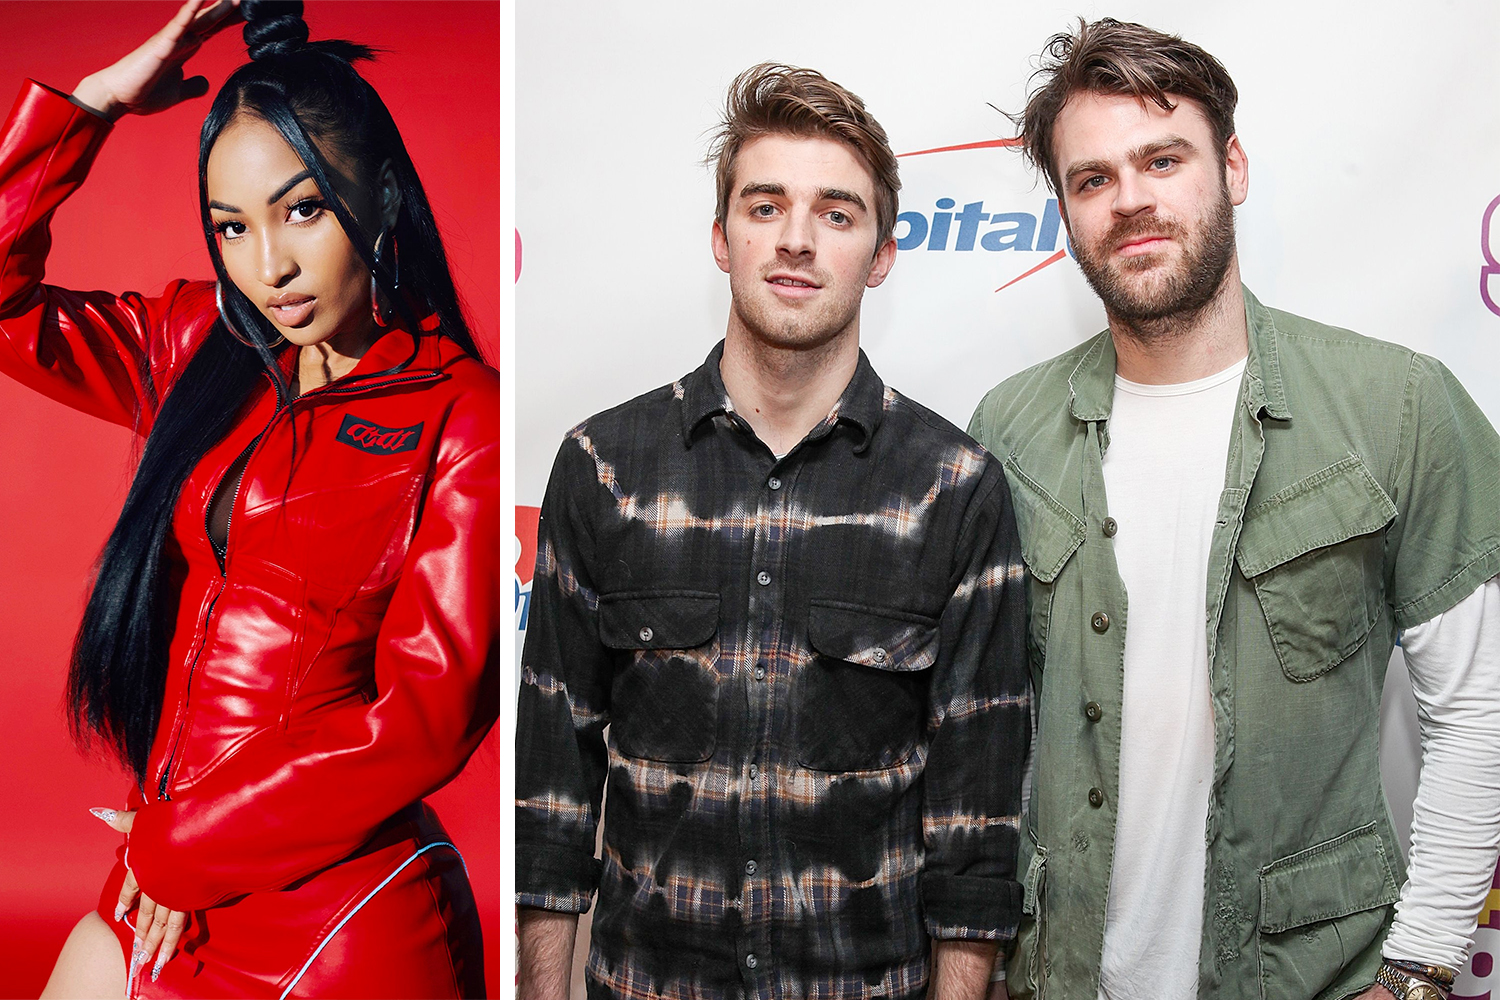 The Chainsmokers and Shenseea Deliver Infectious Collab: "My Bad"